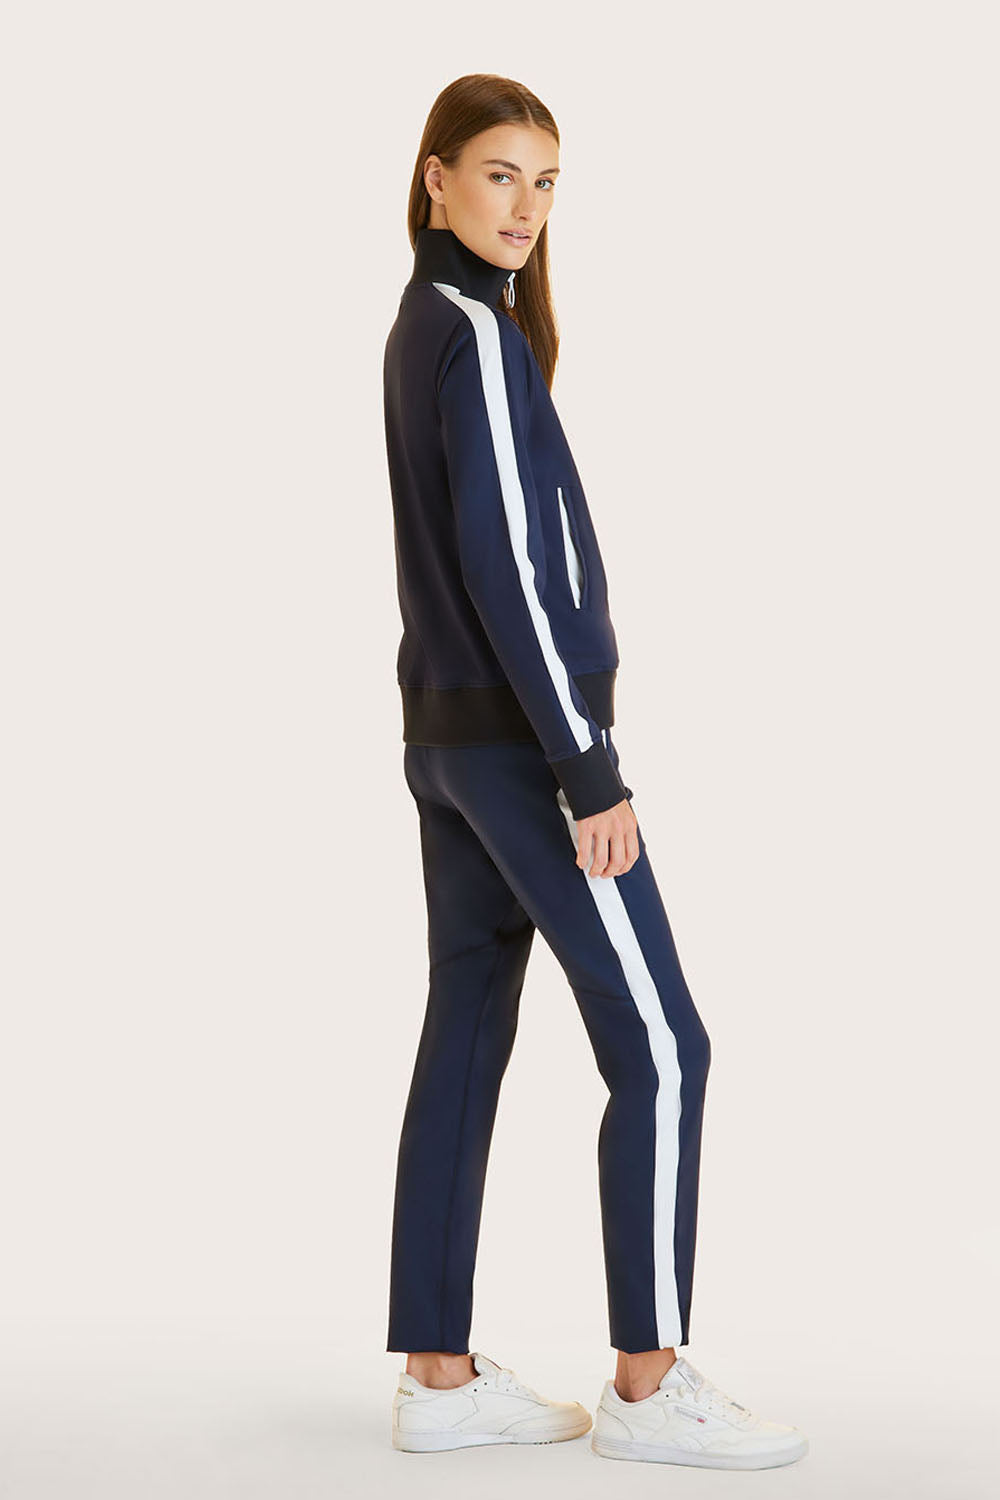 Alala women's active pant in navy with white stripe